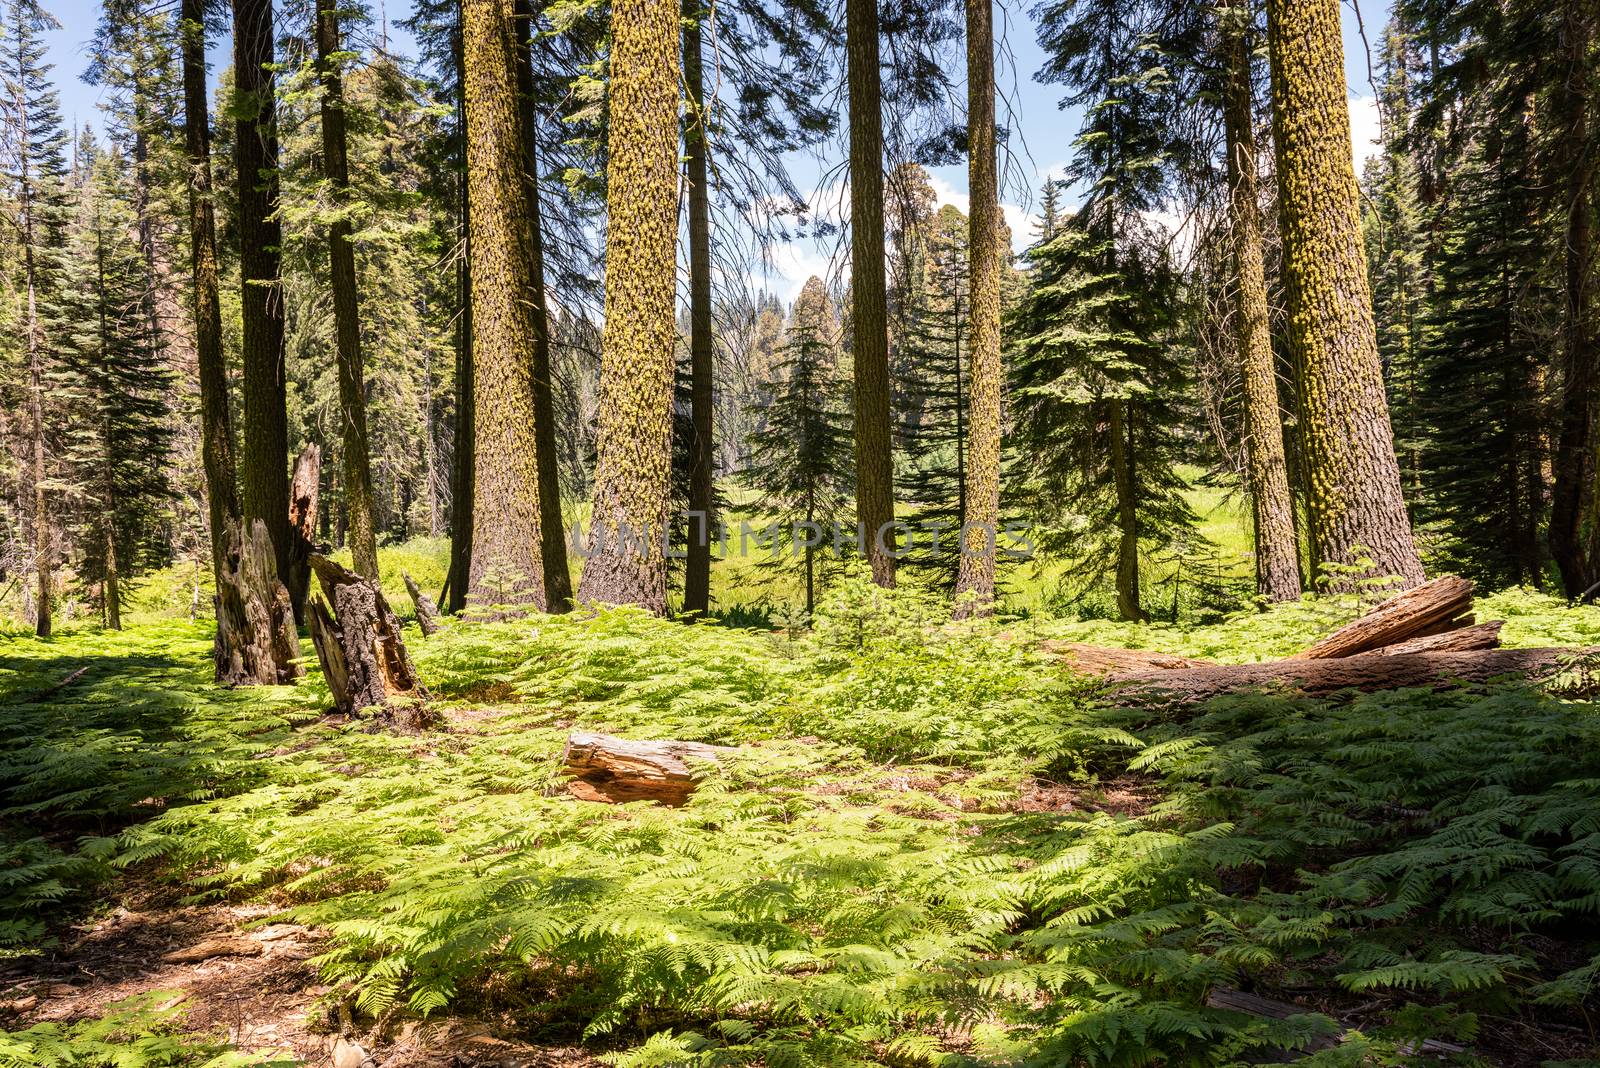 Trees and ferns along Crescent Meadow Loop in Sequoia National Park, California